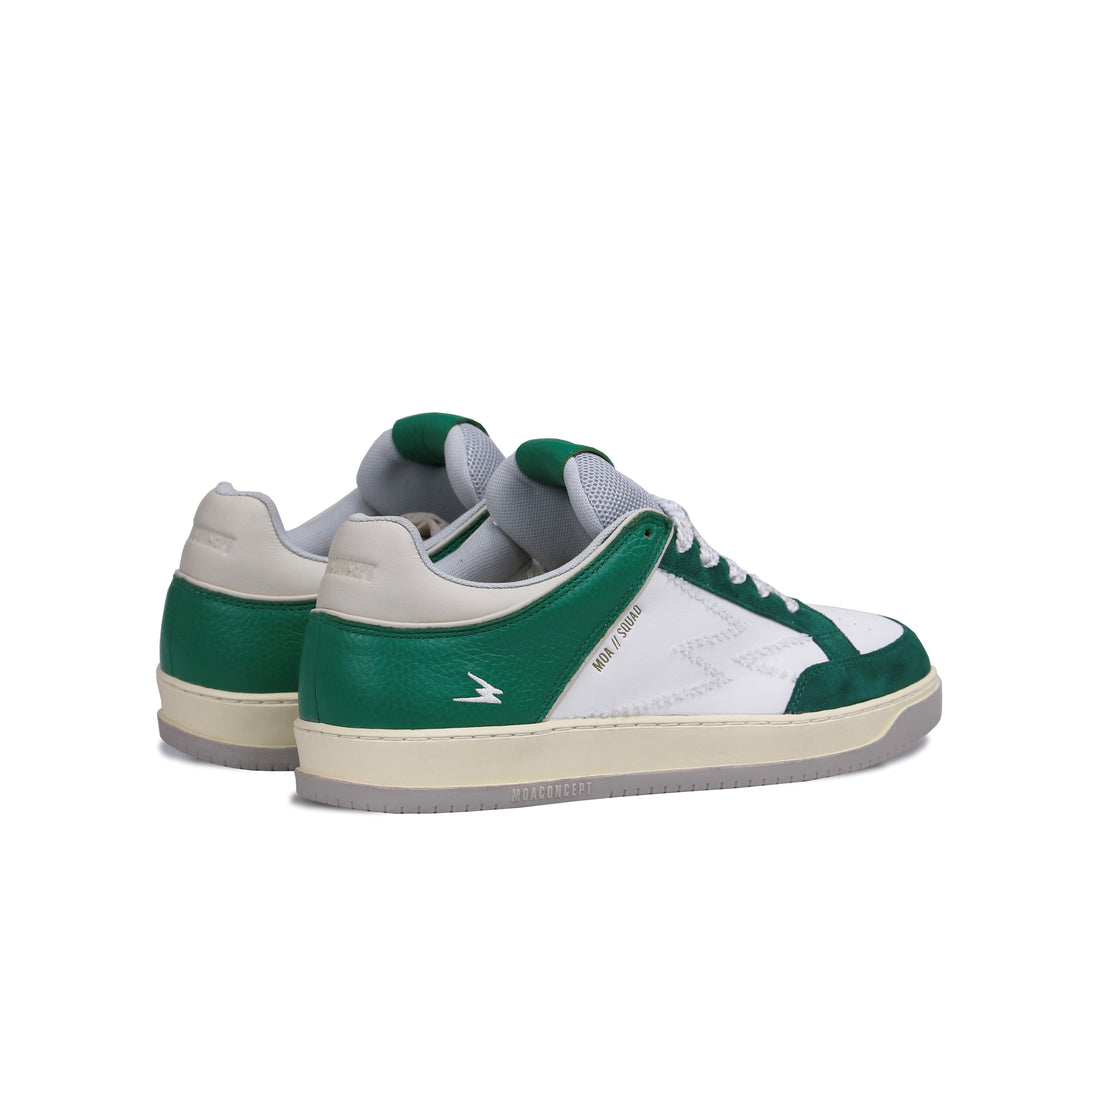 Squad sneaker. Embroidered logo with green details